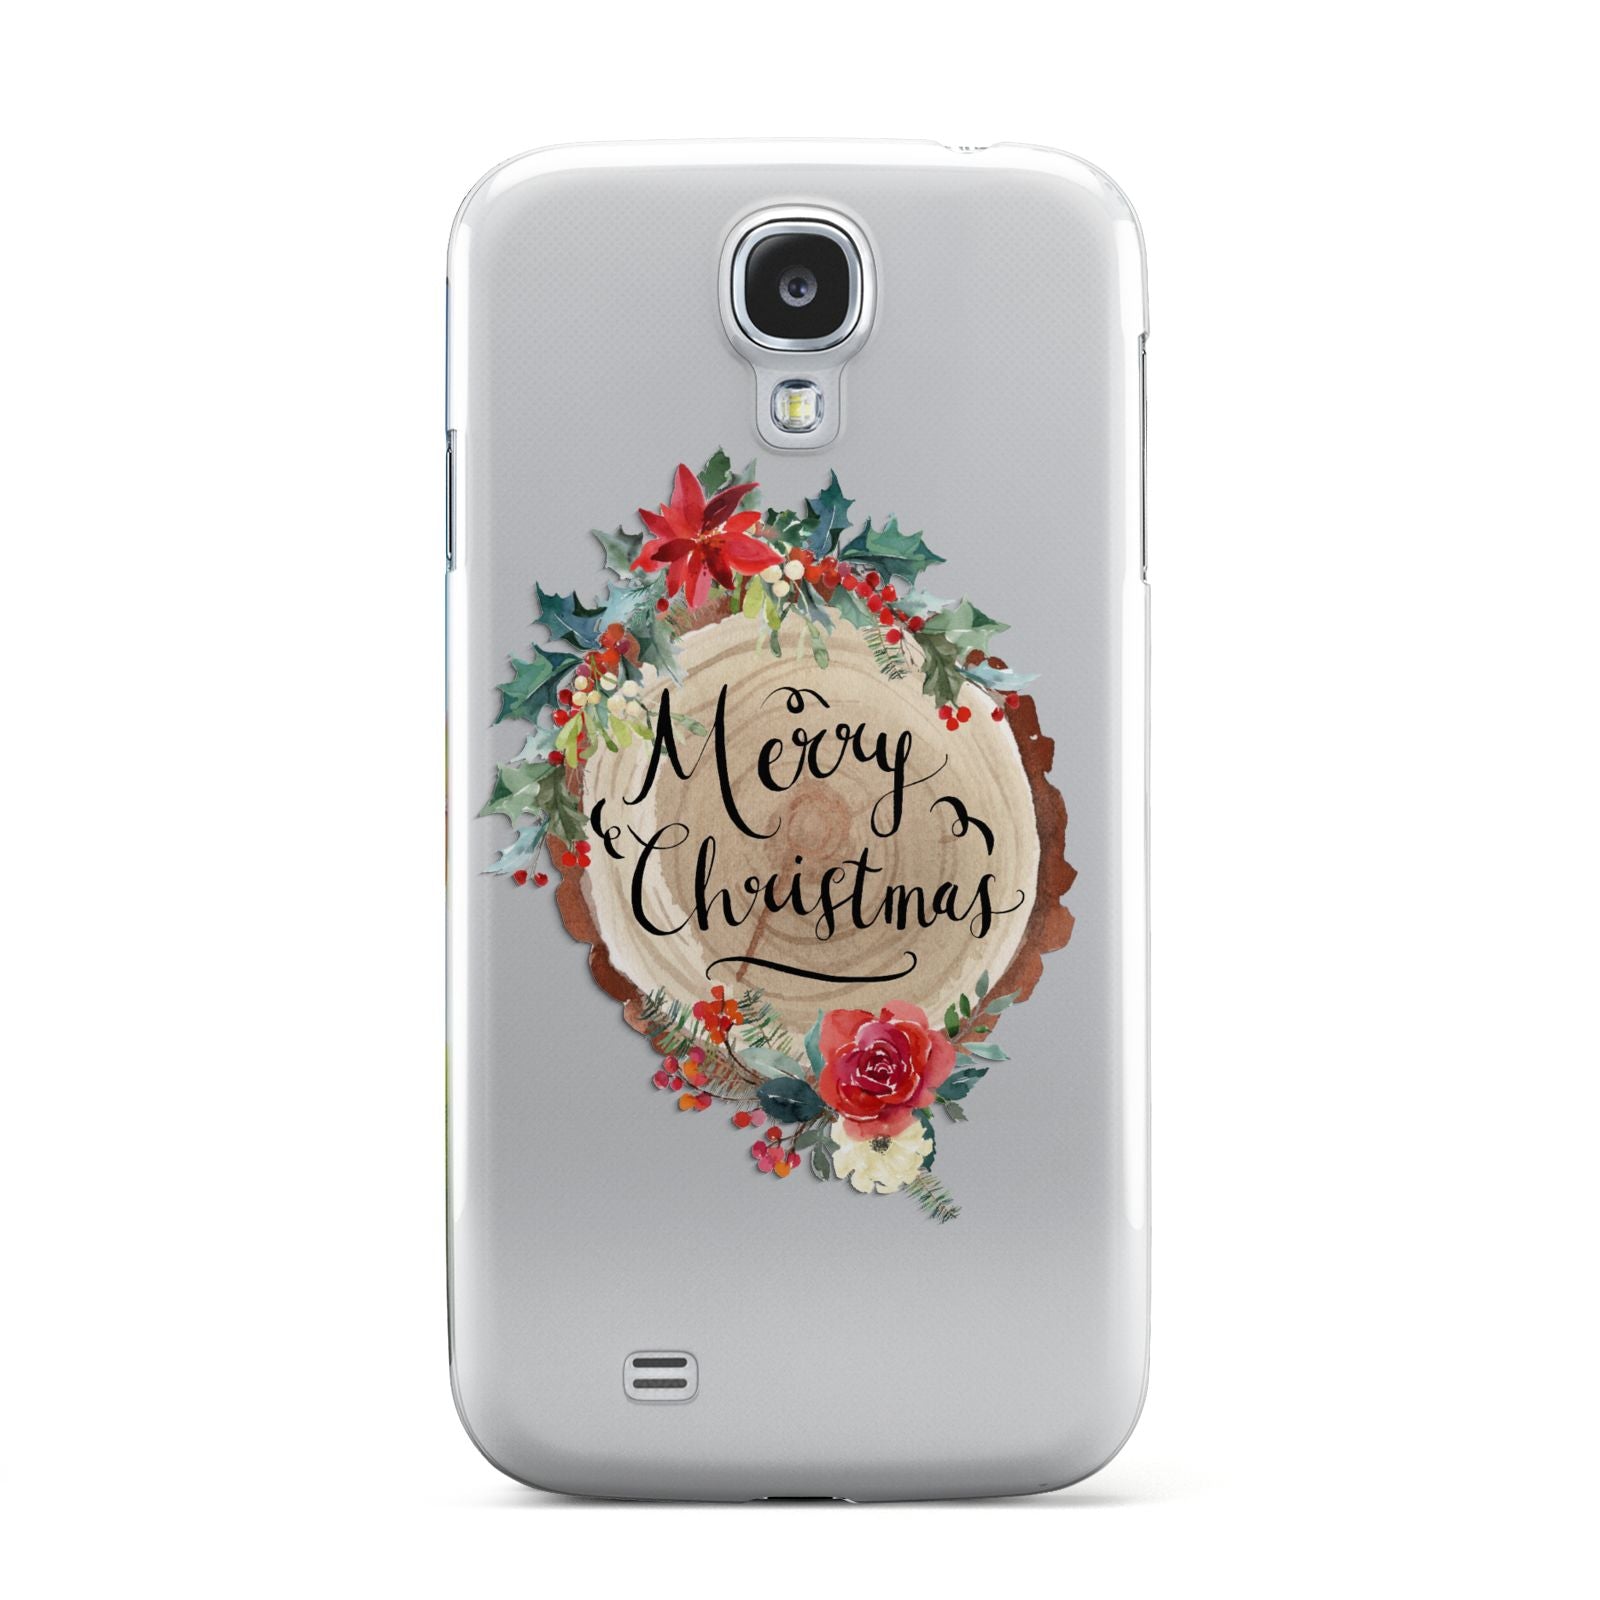 Merry Christmas Log Floral Samsung Galaxy S4 Case